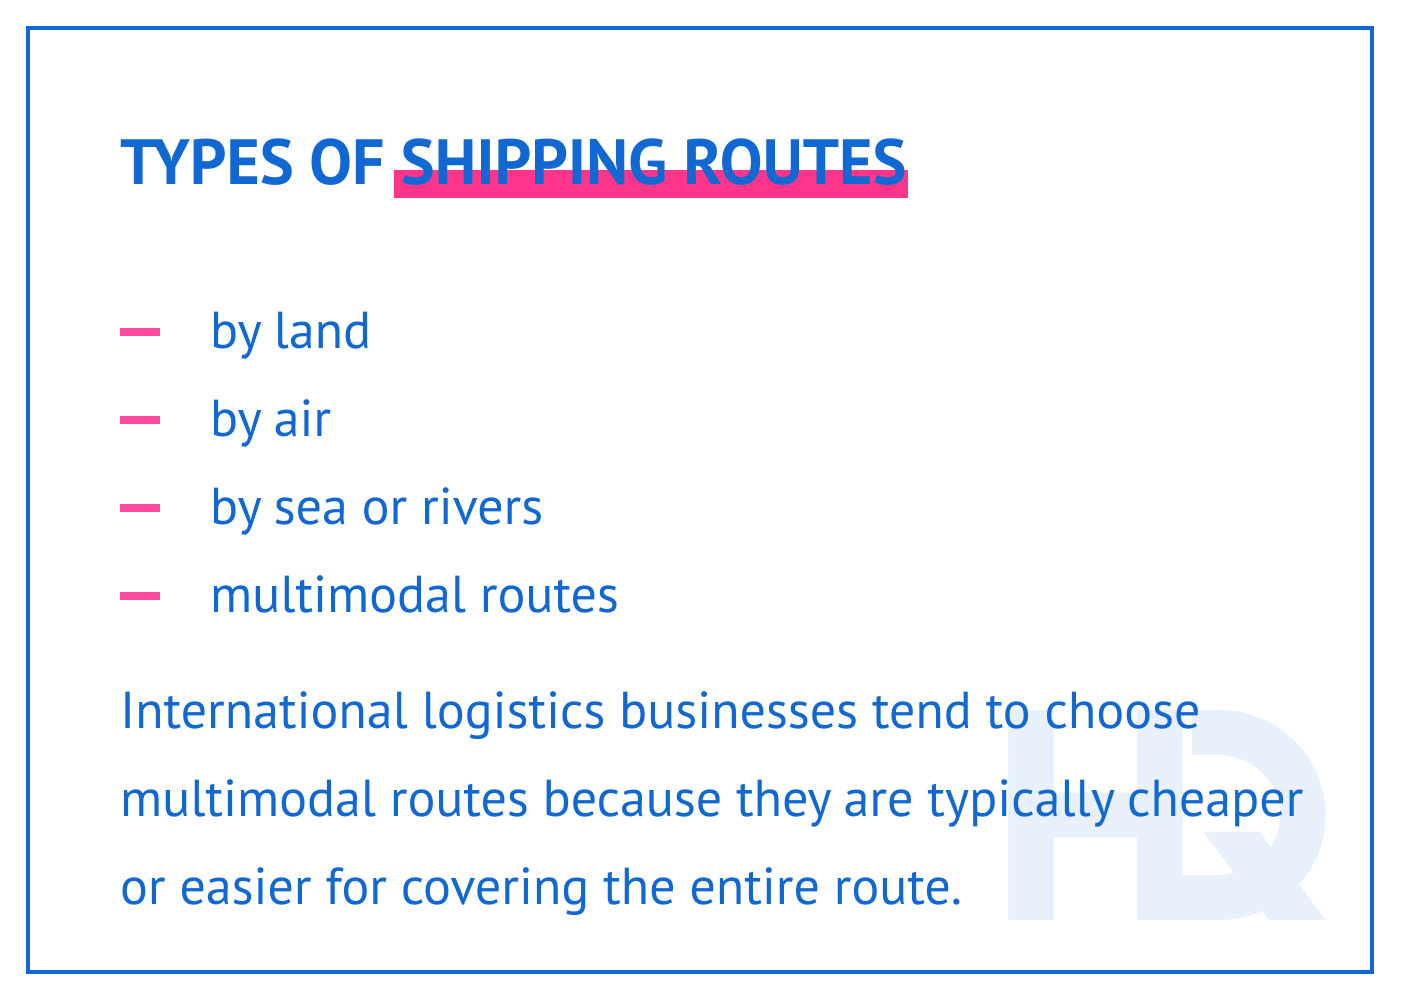 Types of shipping routes in logistics.